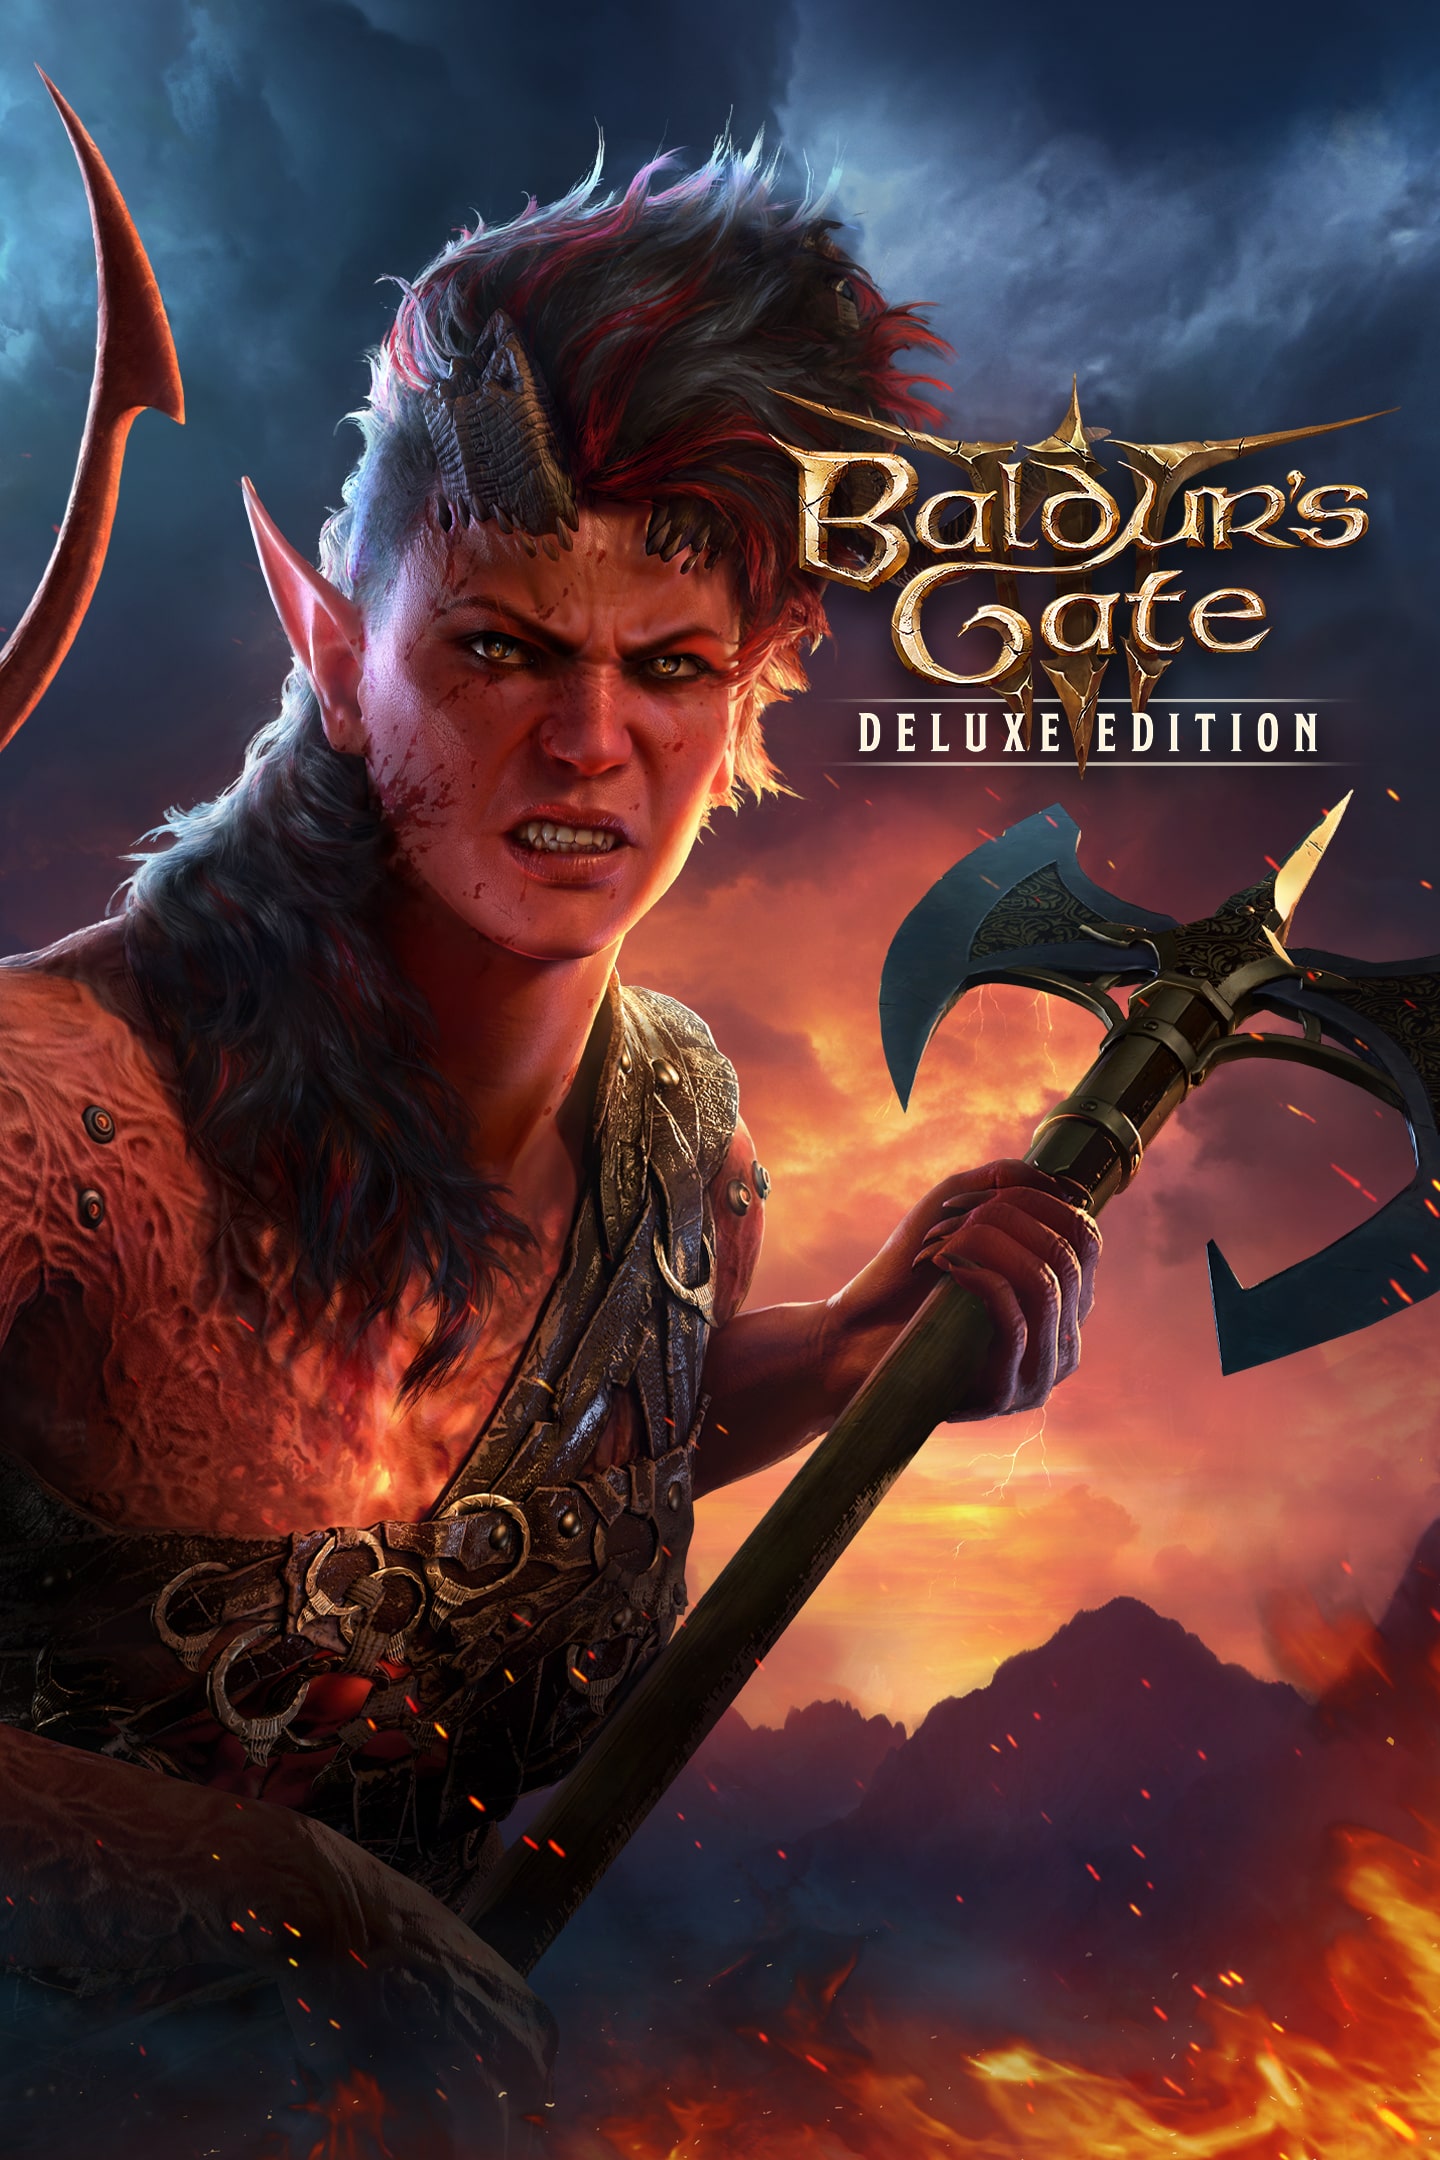 Baldur's Gate 3 - Deluxe Edition (PS5)(New), Buy from Pwned Games with  confidence.